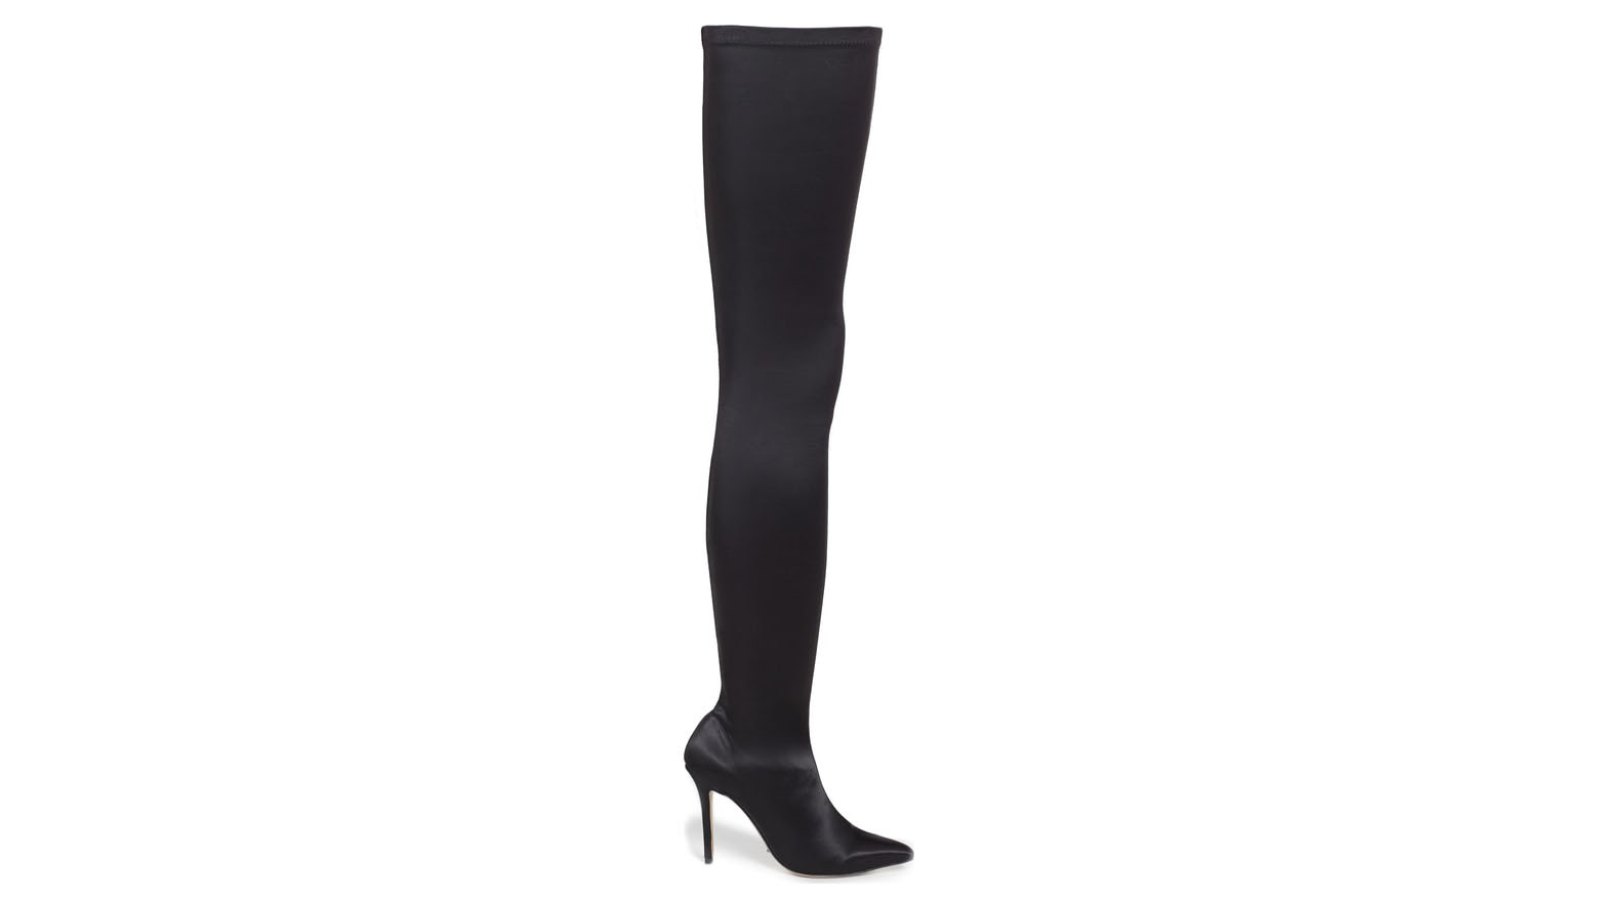 Bianco Thigh High Boots for $150